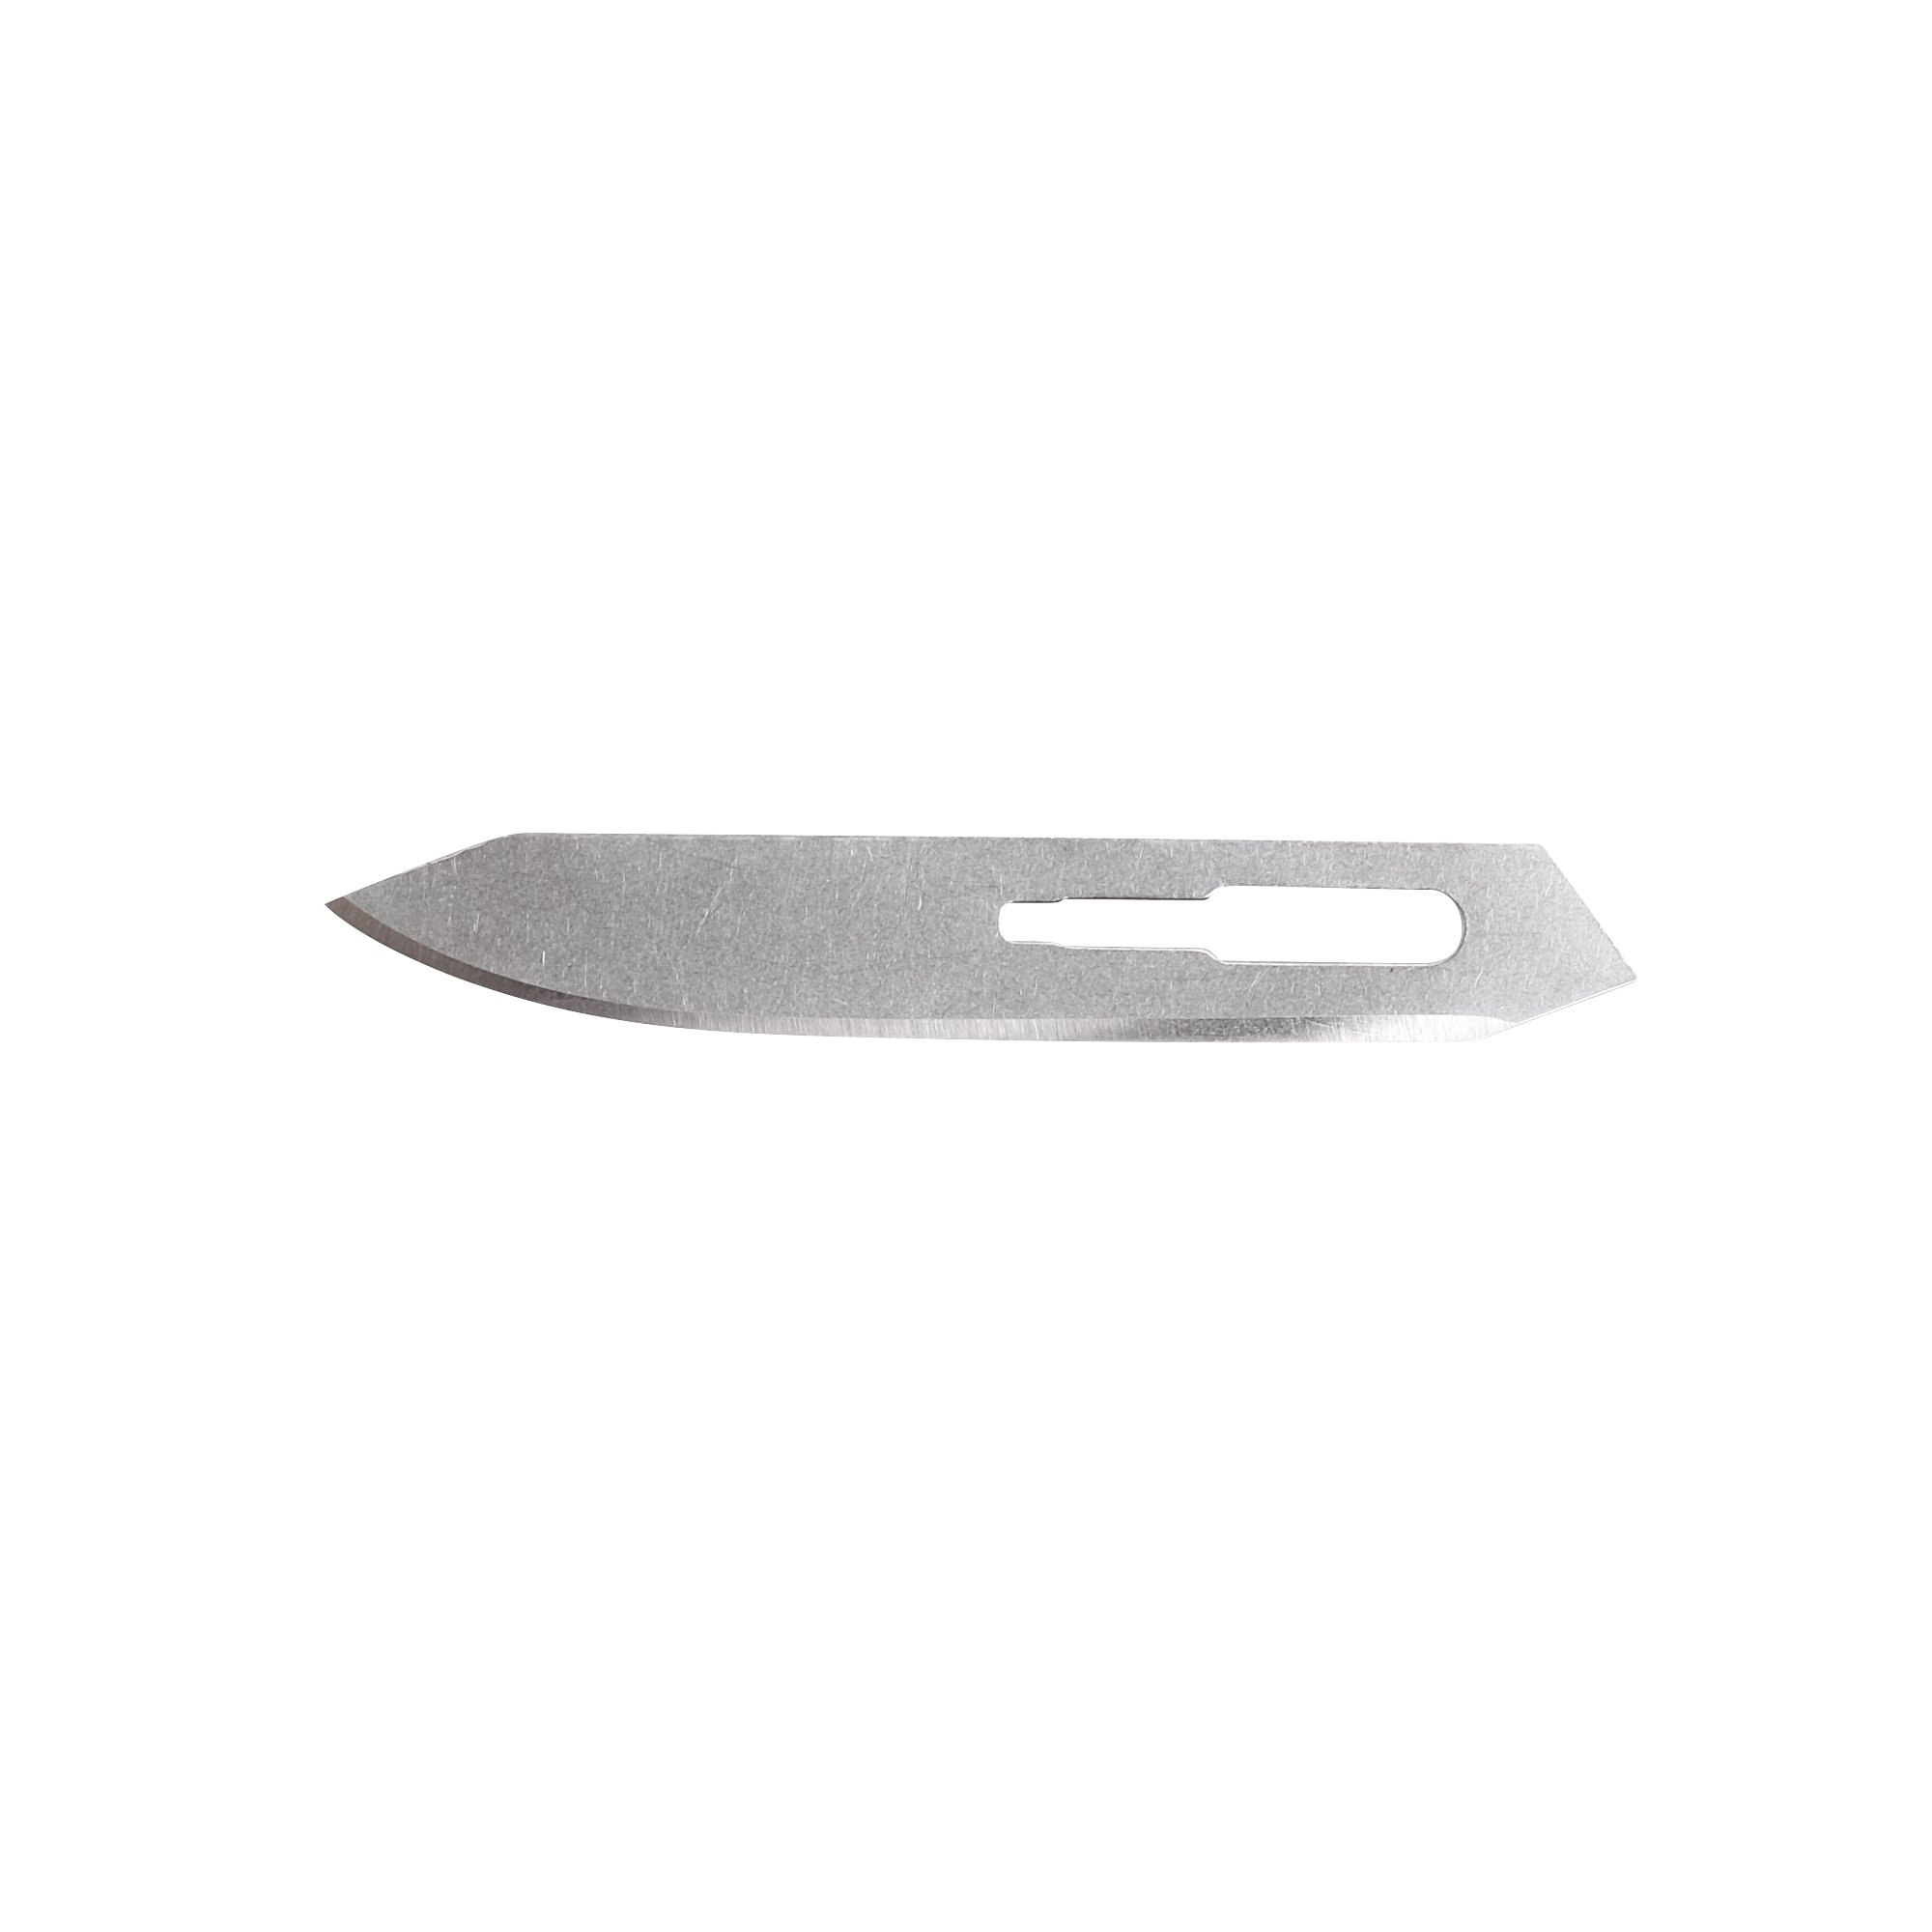 Kershaw LoneRock RBK Blades (1890RBX) Includes 14 Razor Sharp Surgical Precision 2.75-inch High-Performance #60A Stainless Steel Replacement Blades For The LoneRock RBK 1890 Hunting And Caping Knife Black